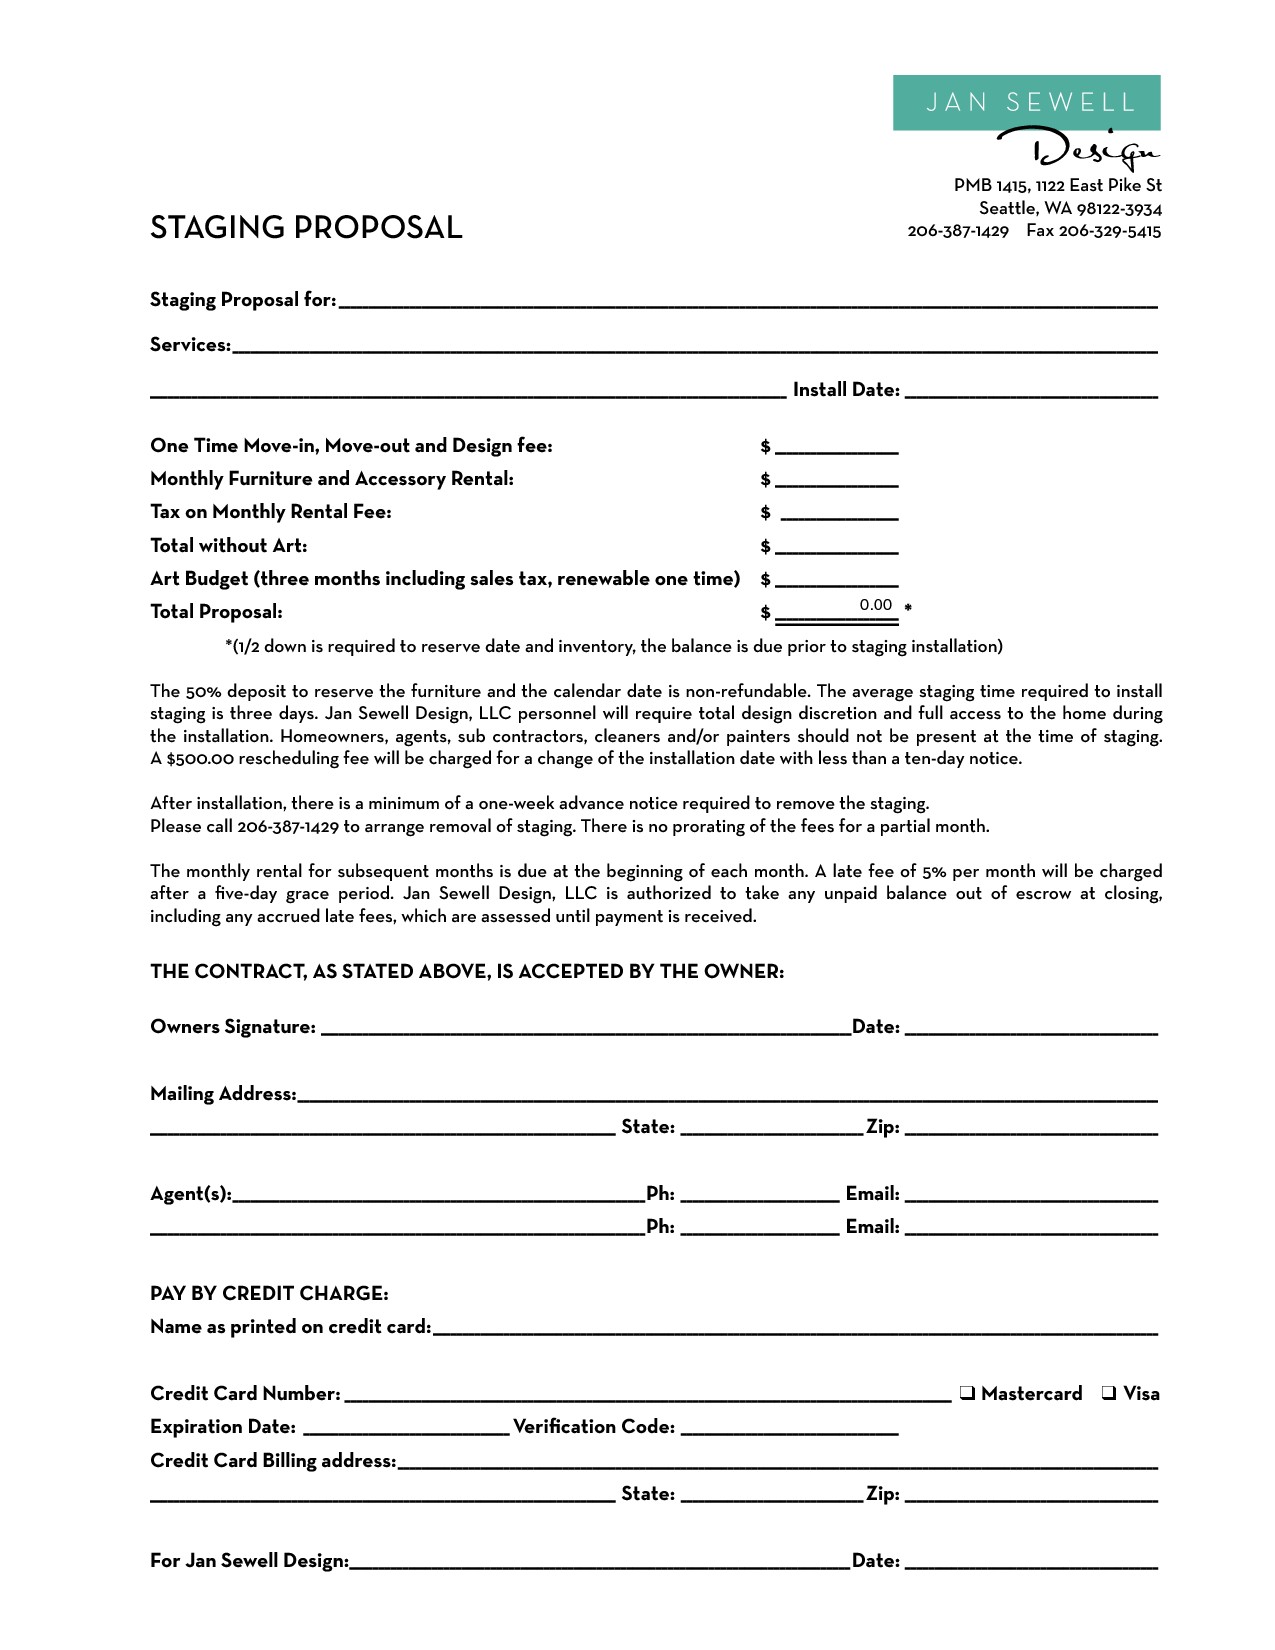 Home Staging Contract Template Bing Images STG In 2018 Document Proposal